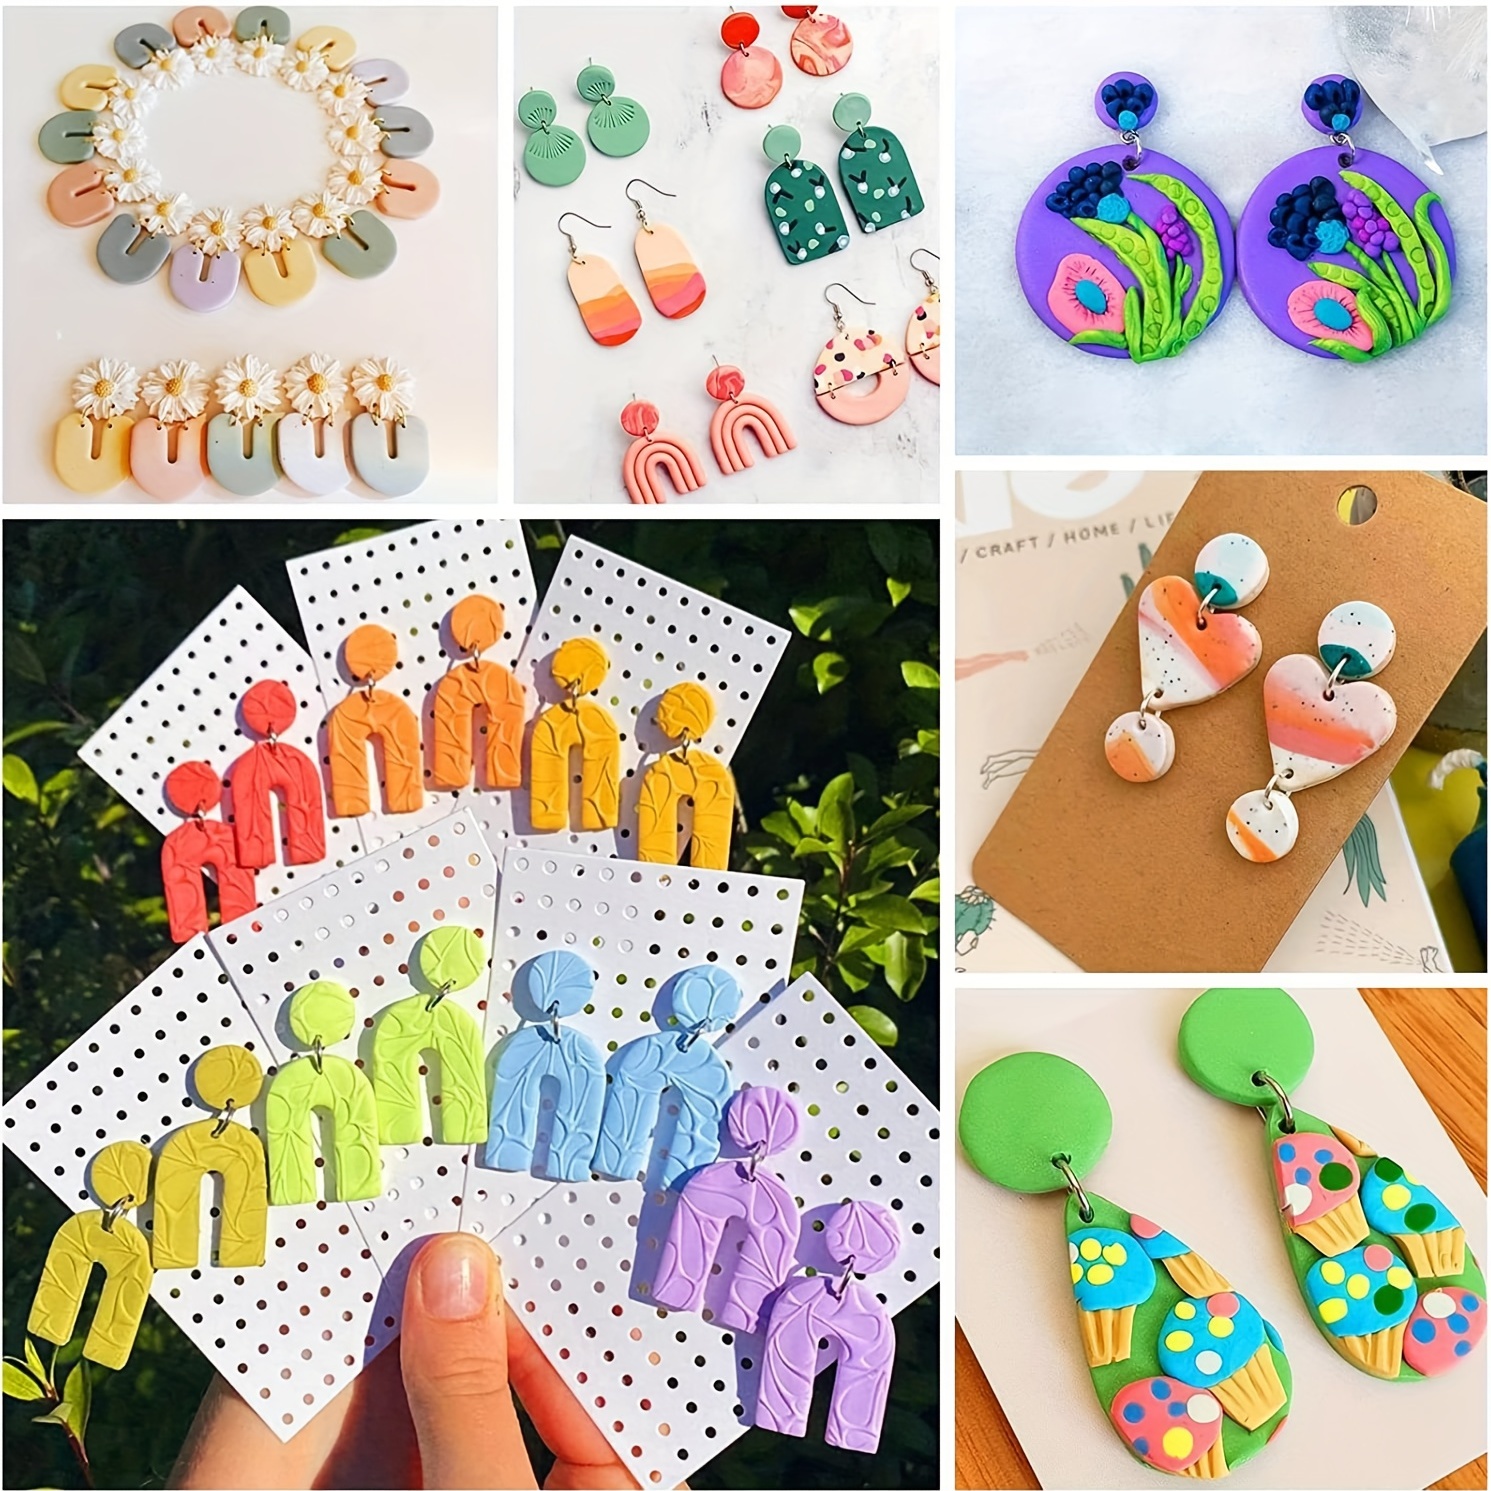 Polymer Clay Cutter set of 4, Clay Earring Cutter